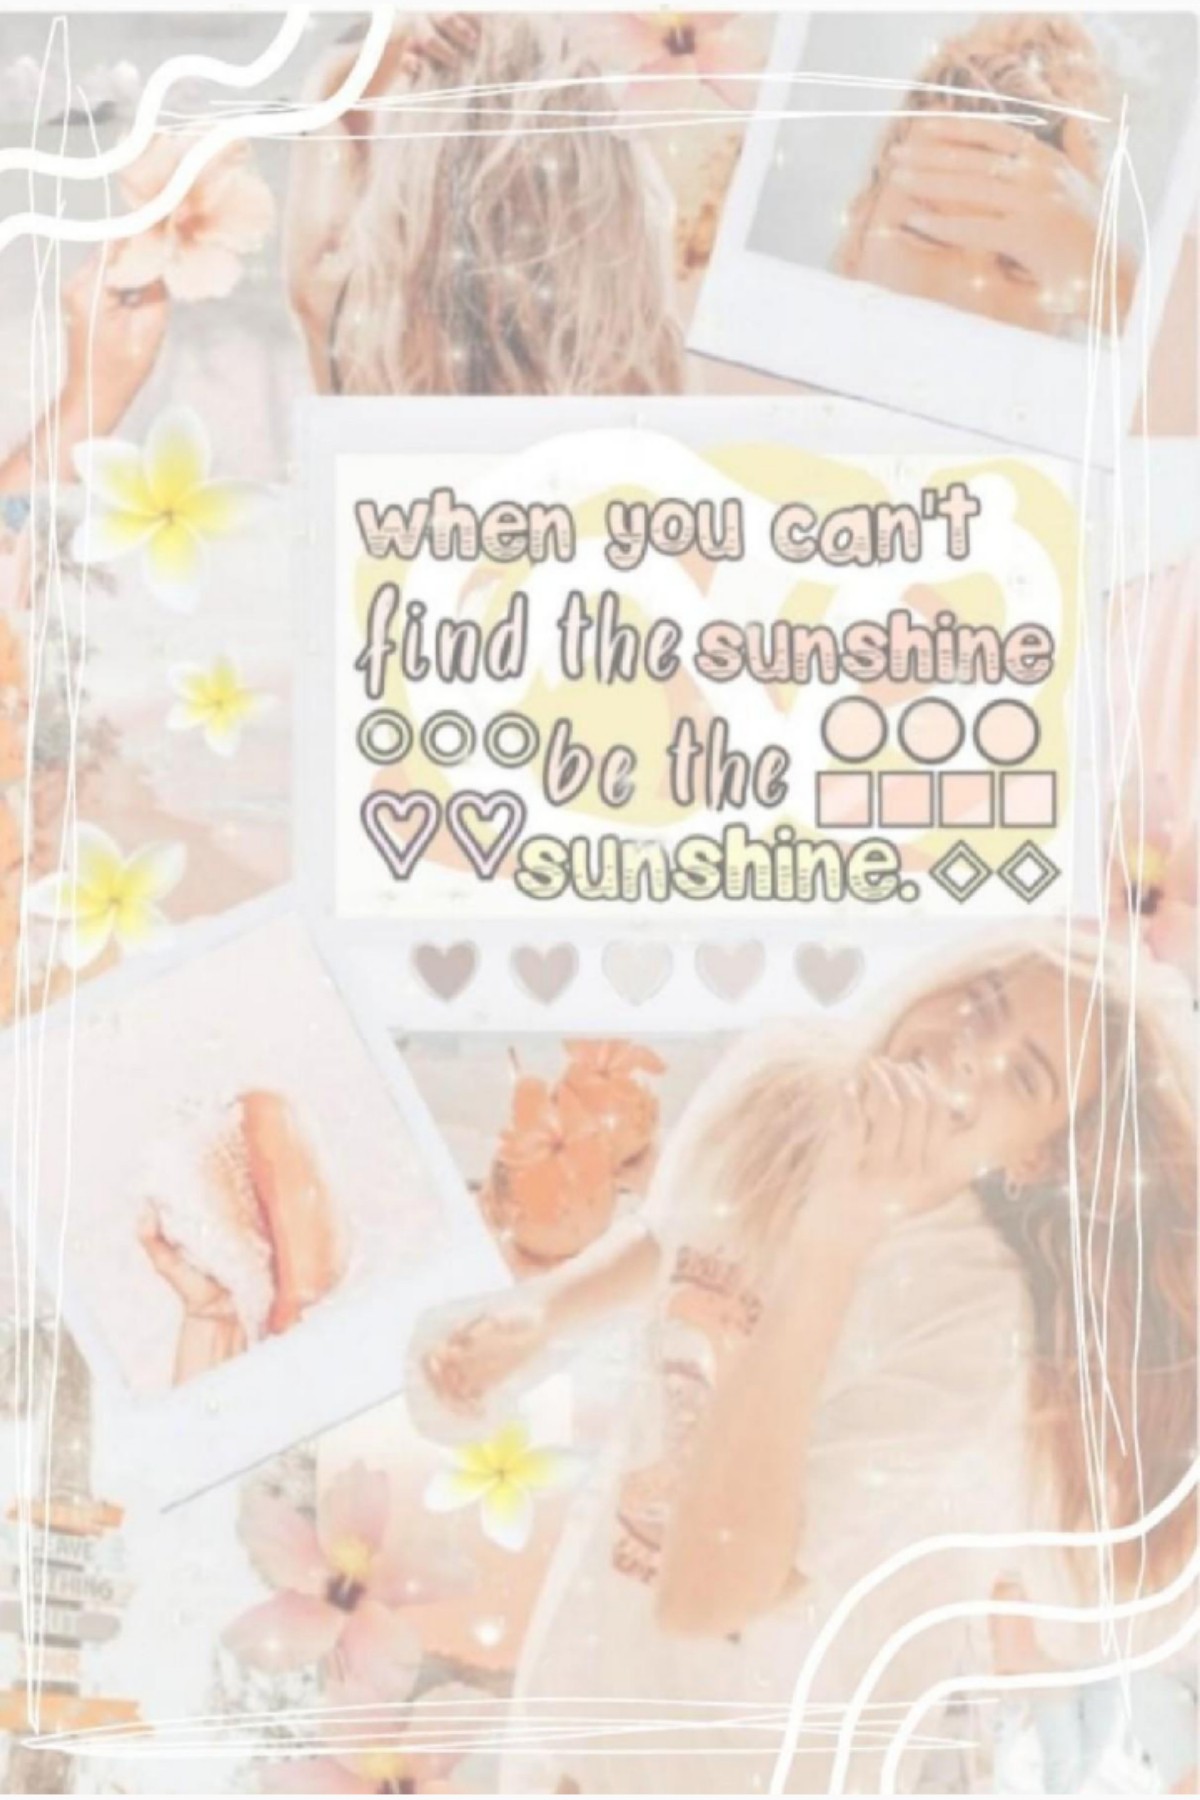 collab with...
the wonderful Laylay_14!
she did the beautiful text and I did the bg!
qotd: how do you guys make sunburns better?
no aotd but my skin is dying